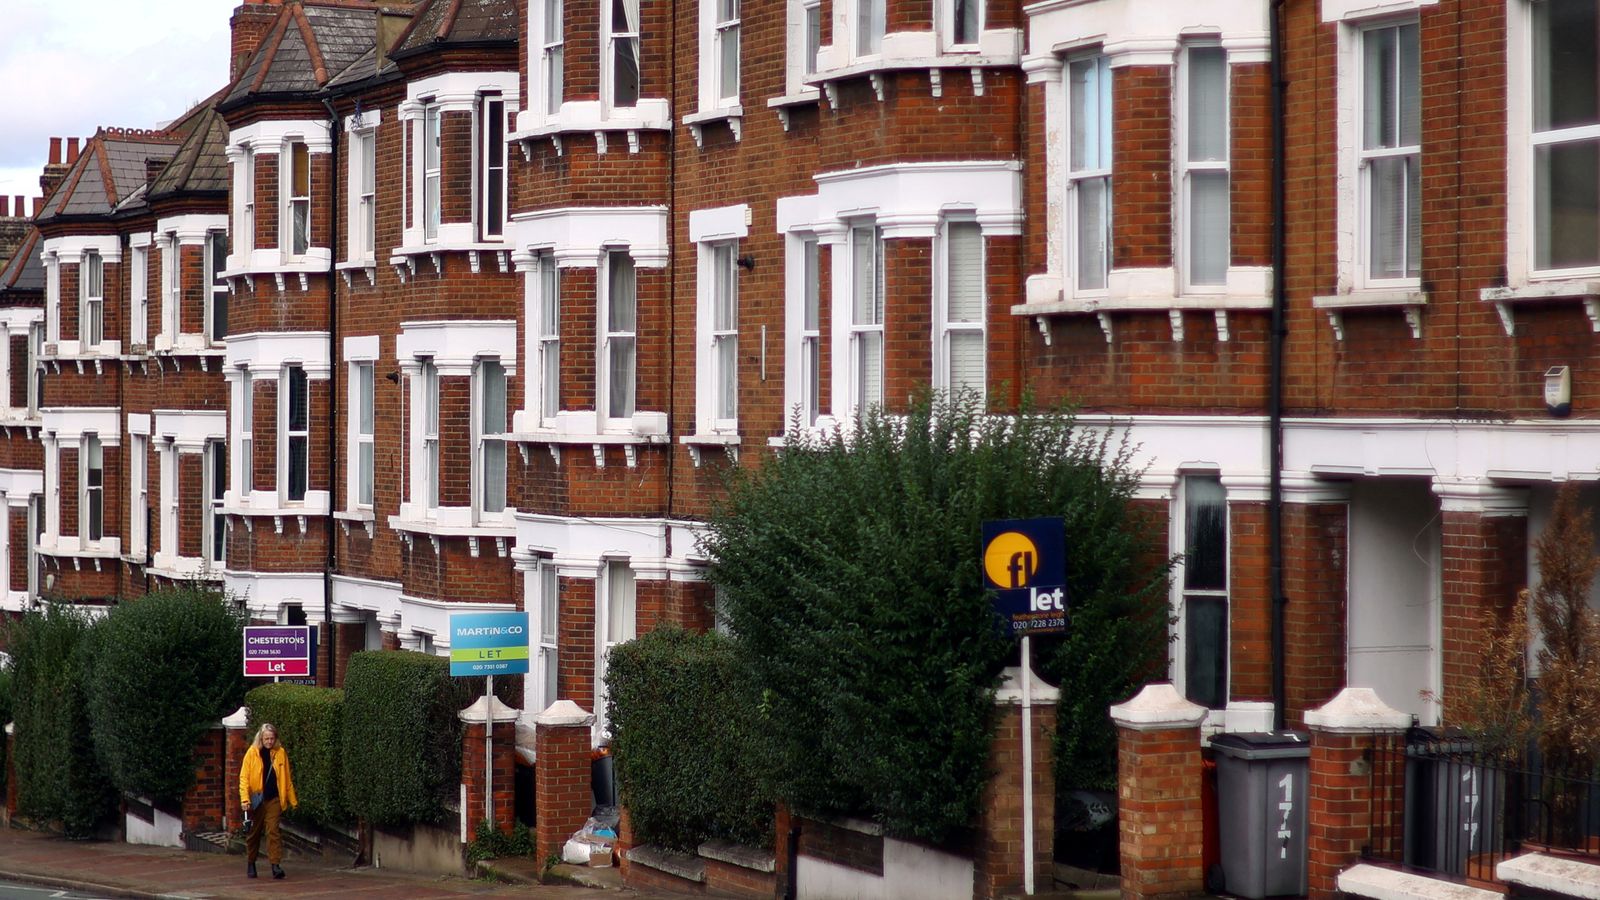 House prices fall for fourth month in row